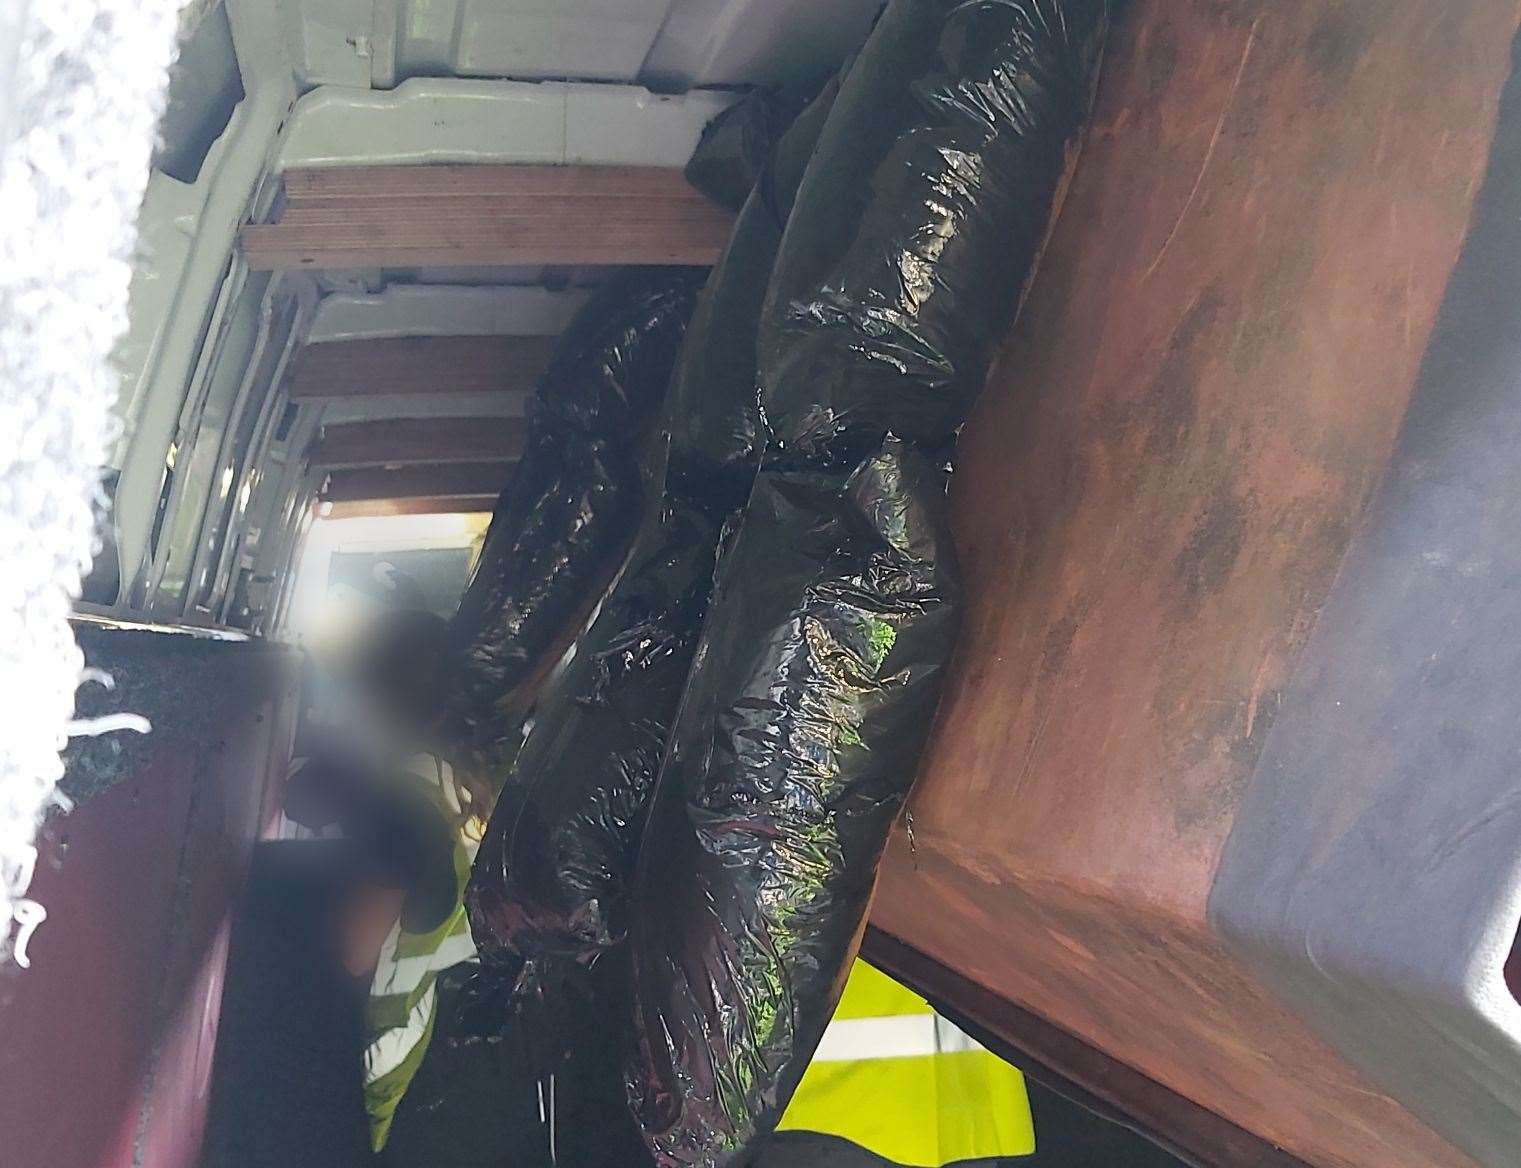 The stash was found in a hidden compartment within the van. Picture: ERSOU